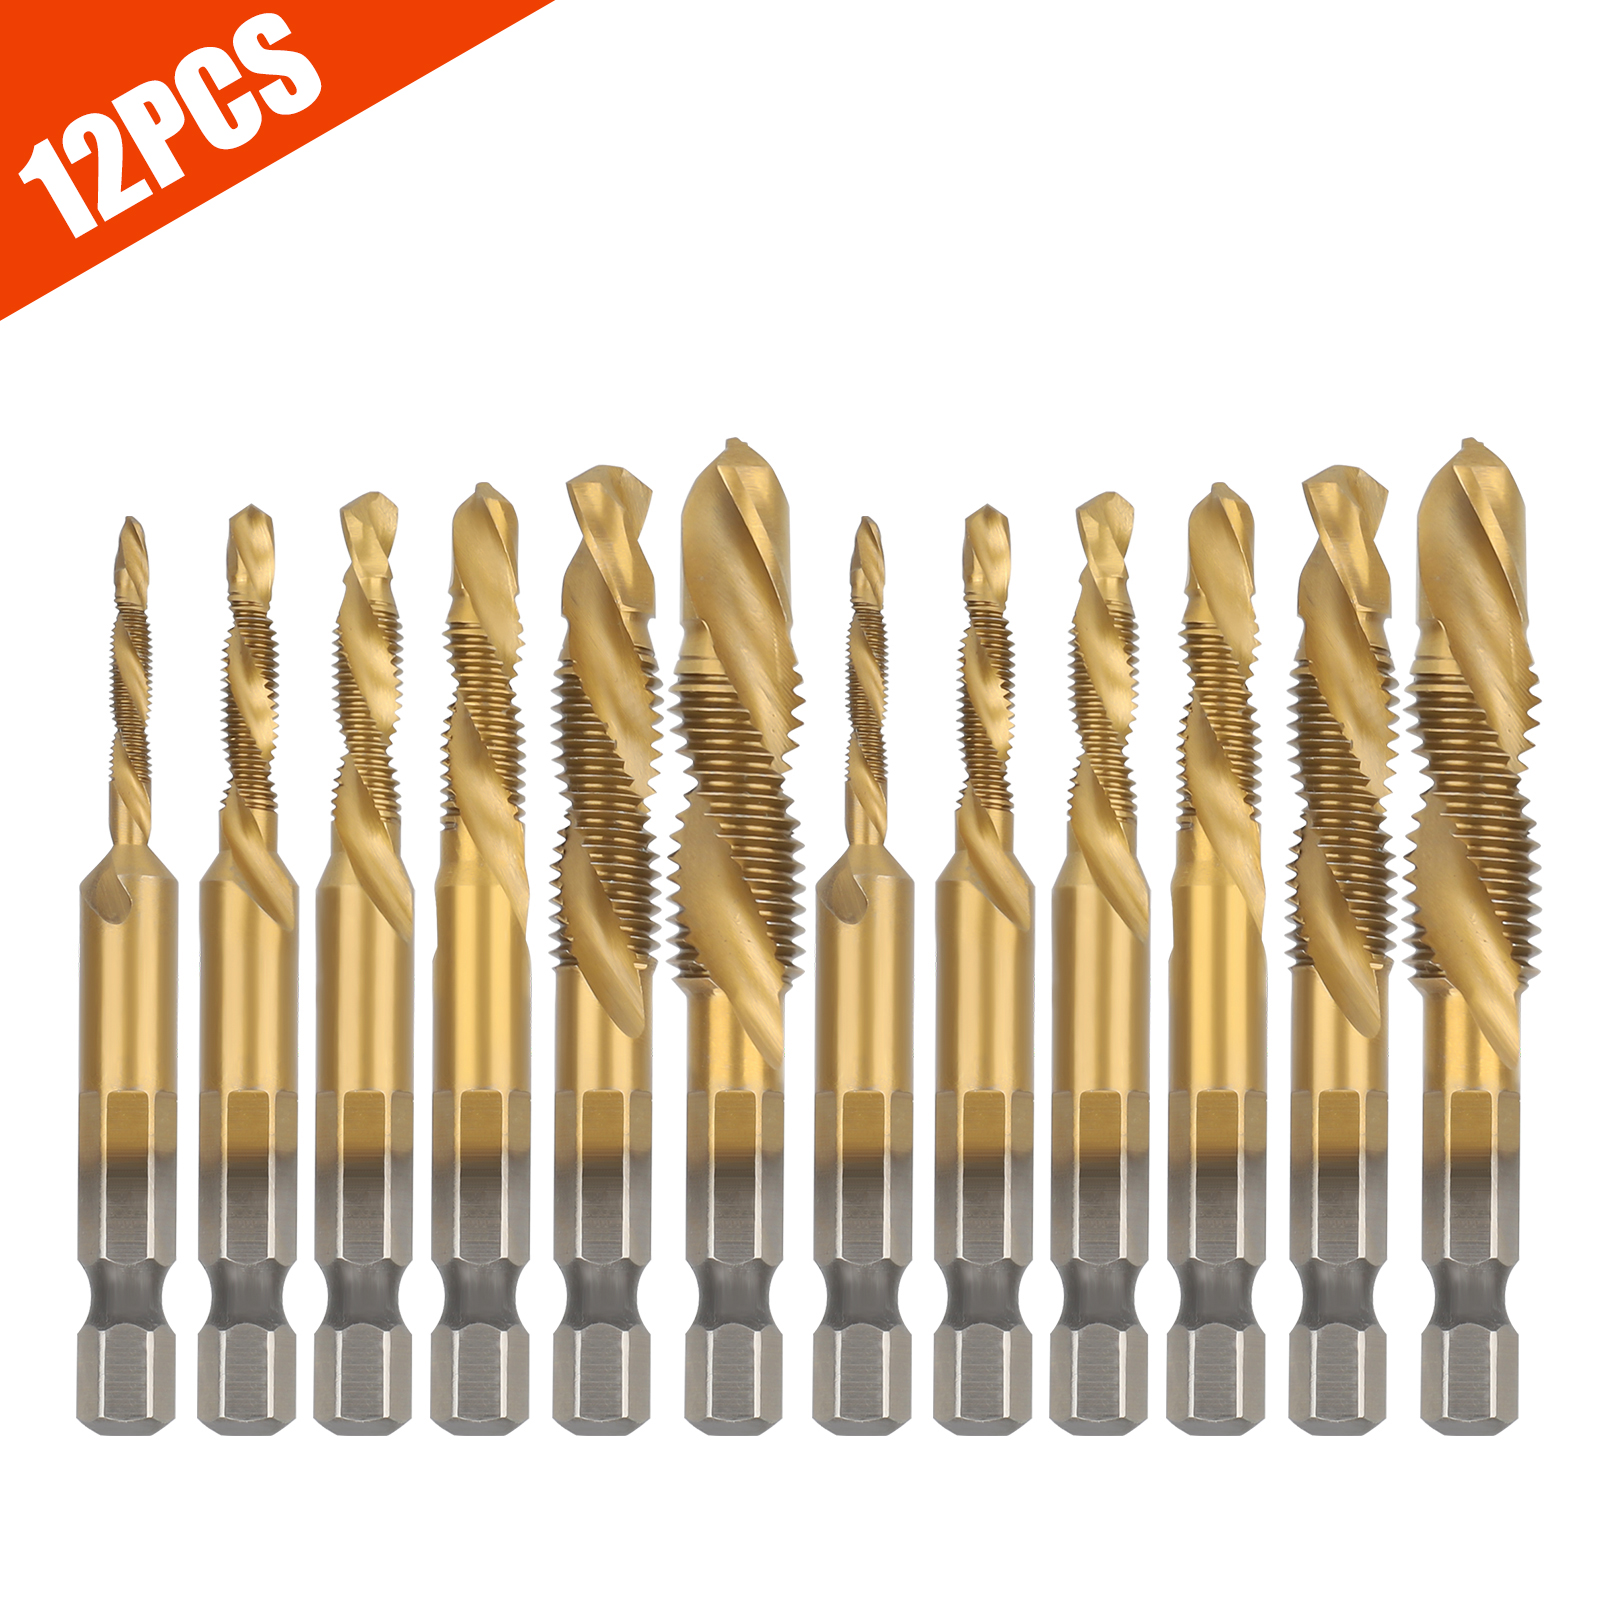 - as described M3-M10 Silver Almencla 6 Pcs 1/4 inch HSS Steel Hex Shank Combination Drill and Tap Bit Metric Screw Taps Tool Set 